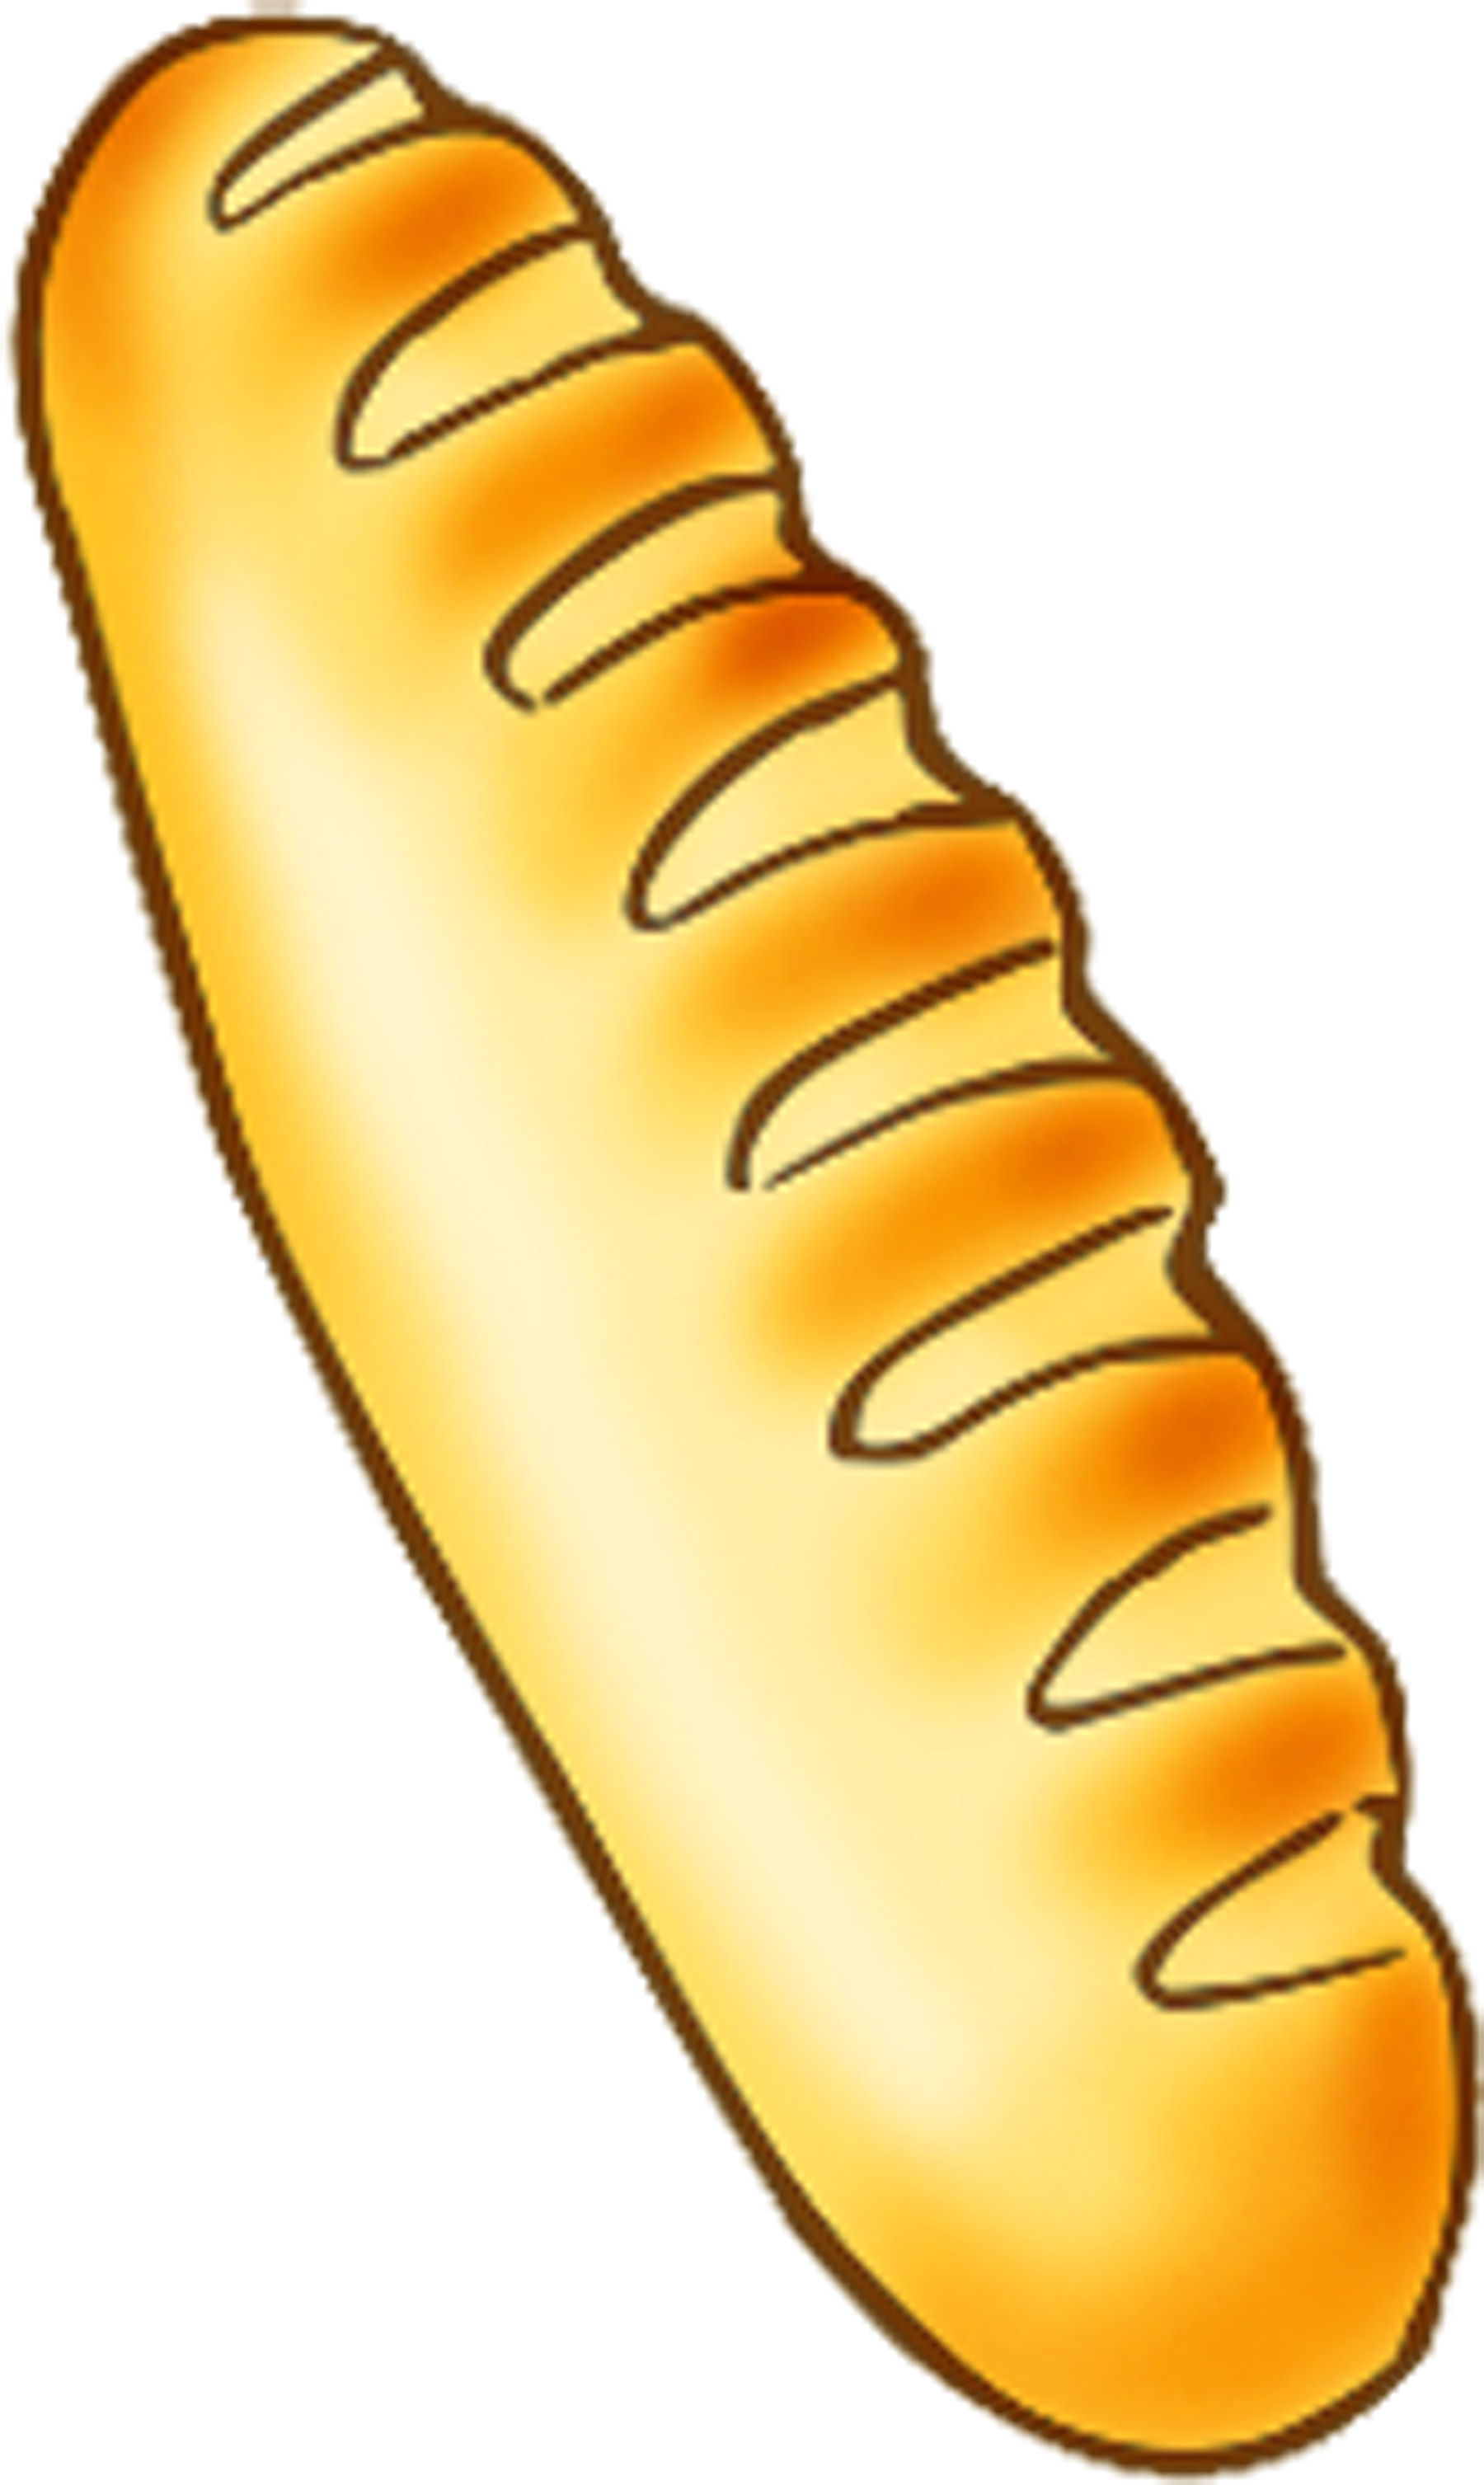 Bread pictures cliparts